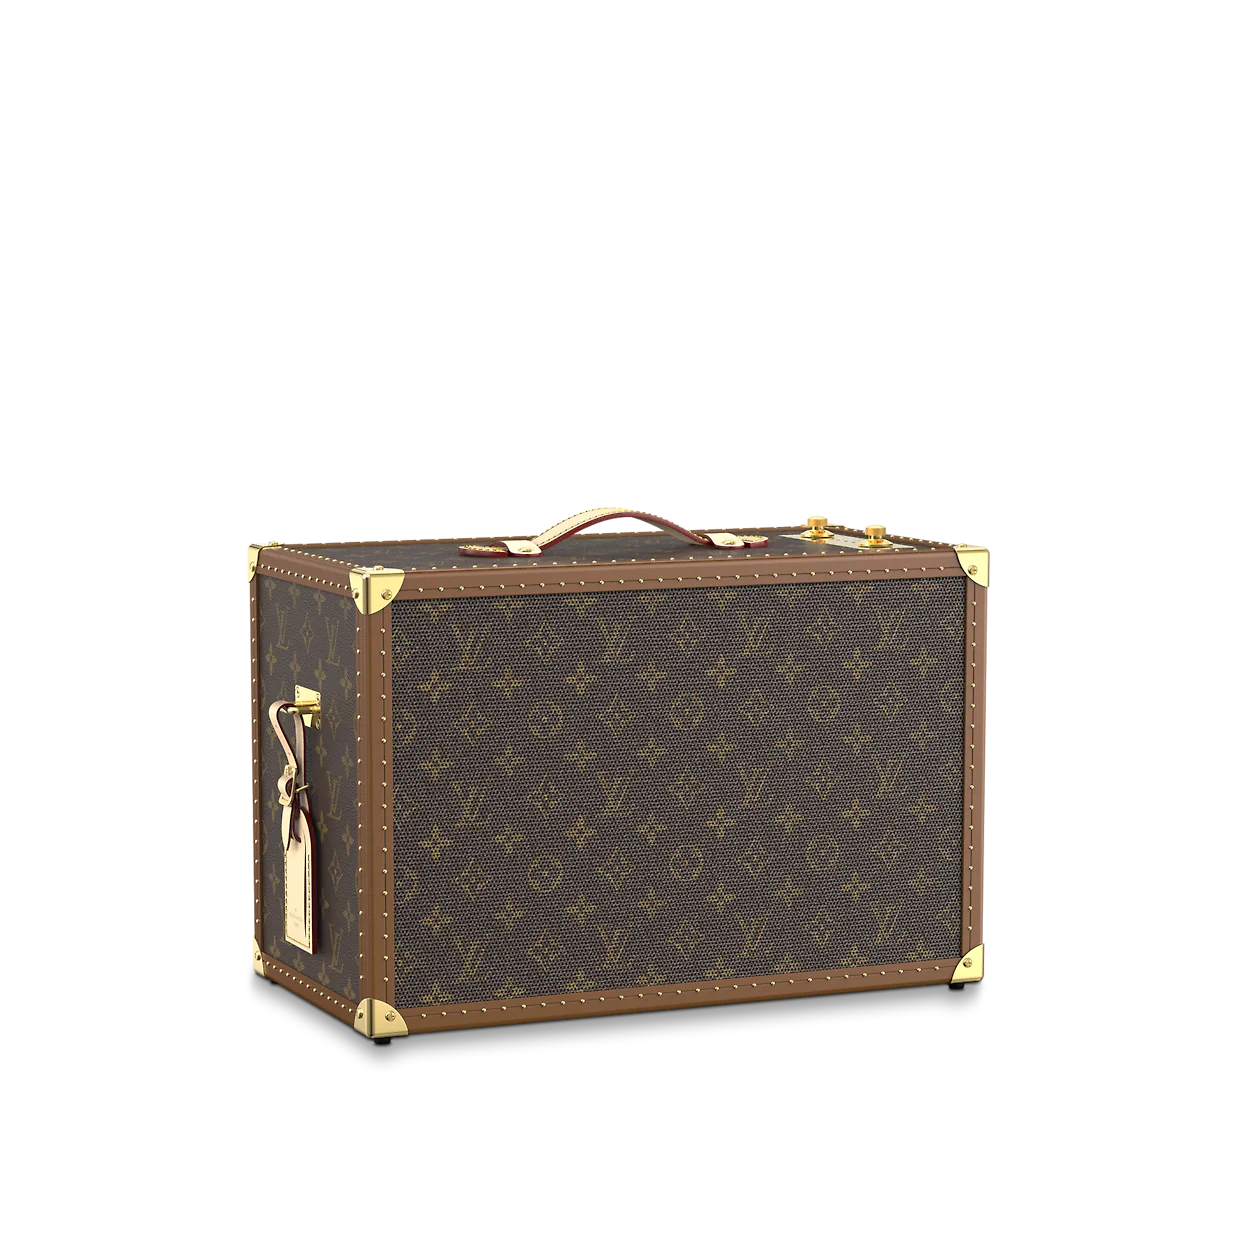 Top Trunks: Louis Vuitton's forever fashionable suitcases